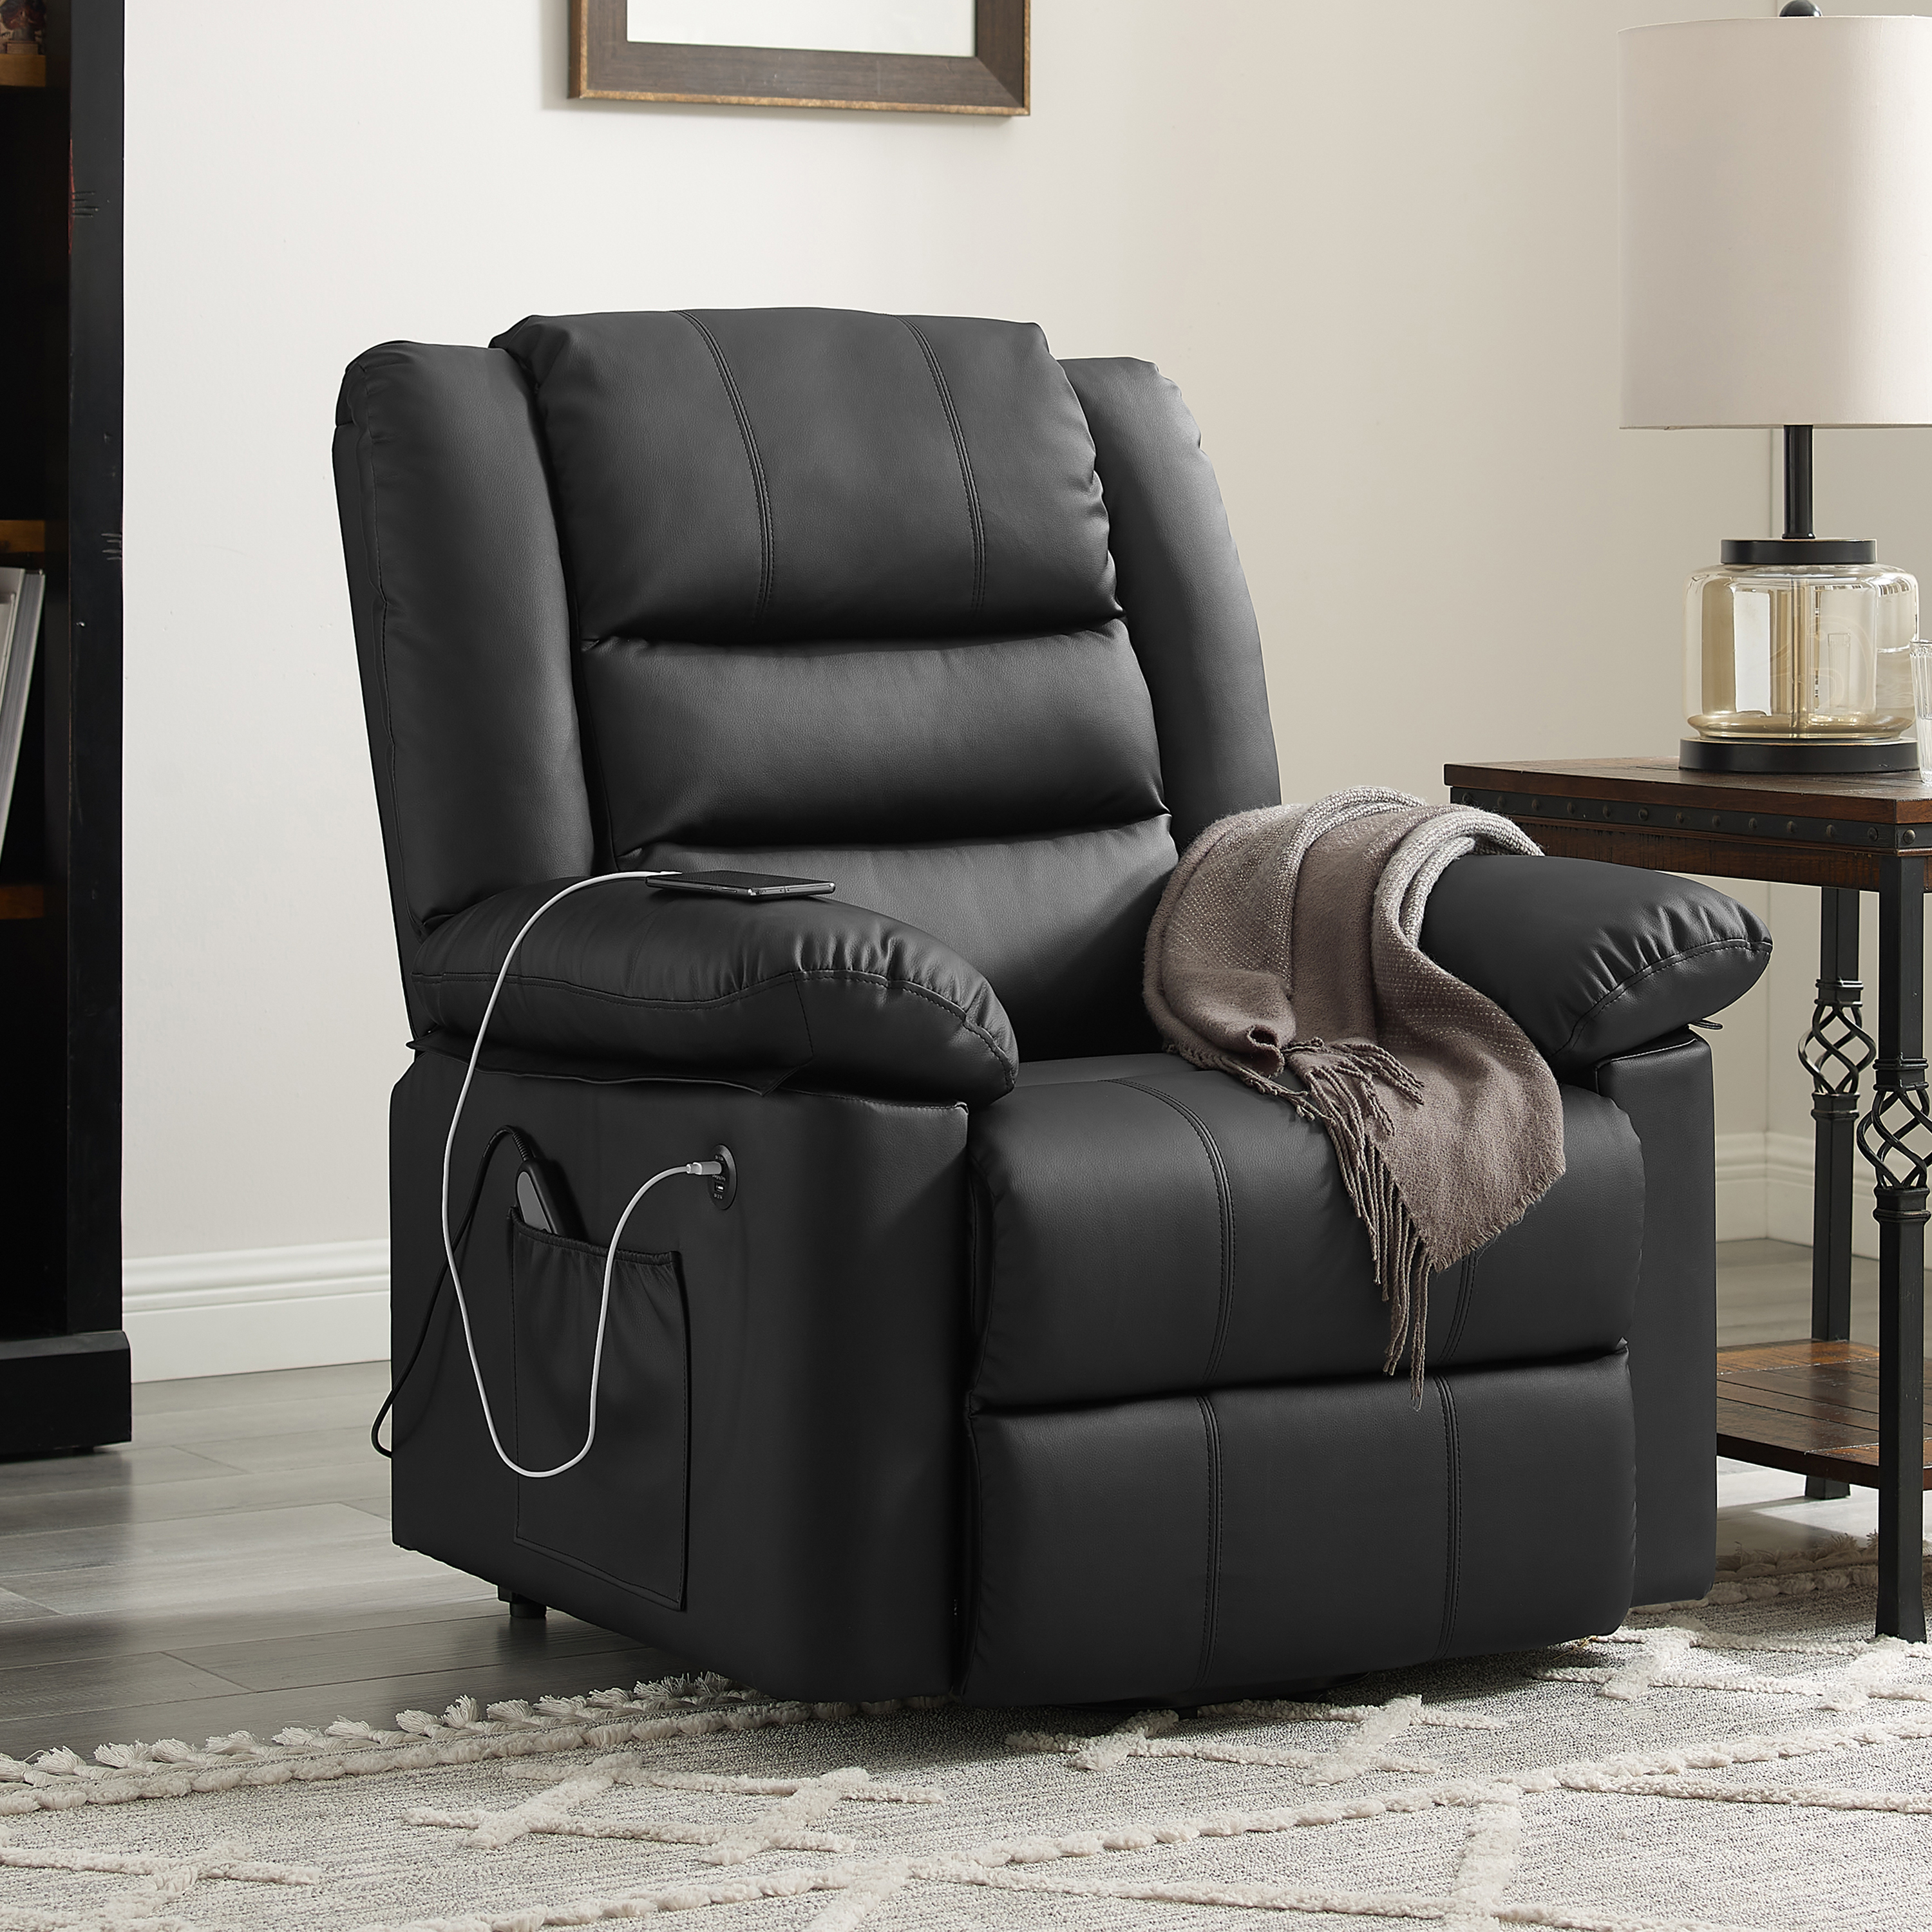 Hillsdale Cedar City Power Lift Faux Leather Recliner with USB, Midnight Black - image 1 of 23